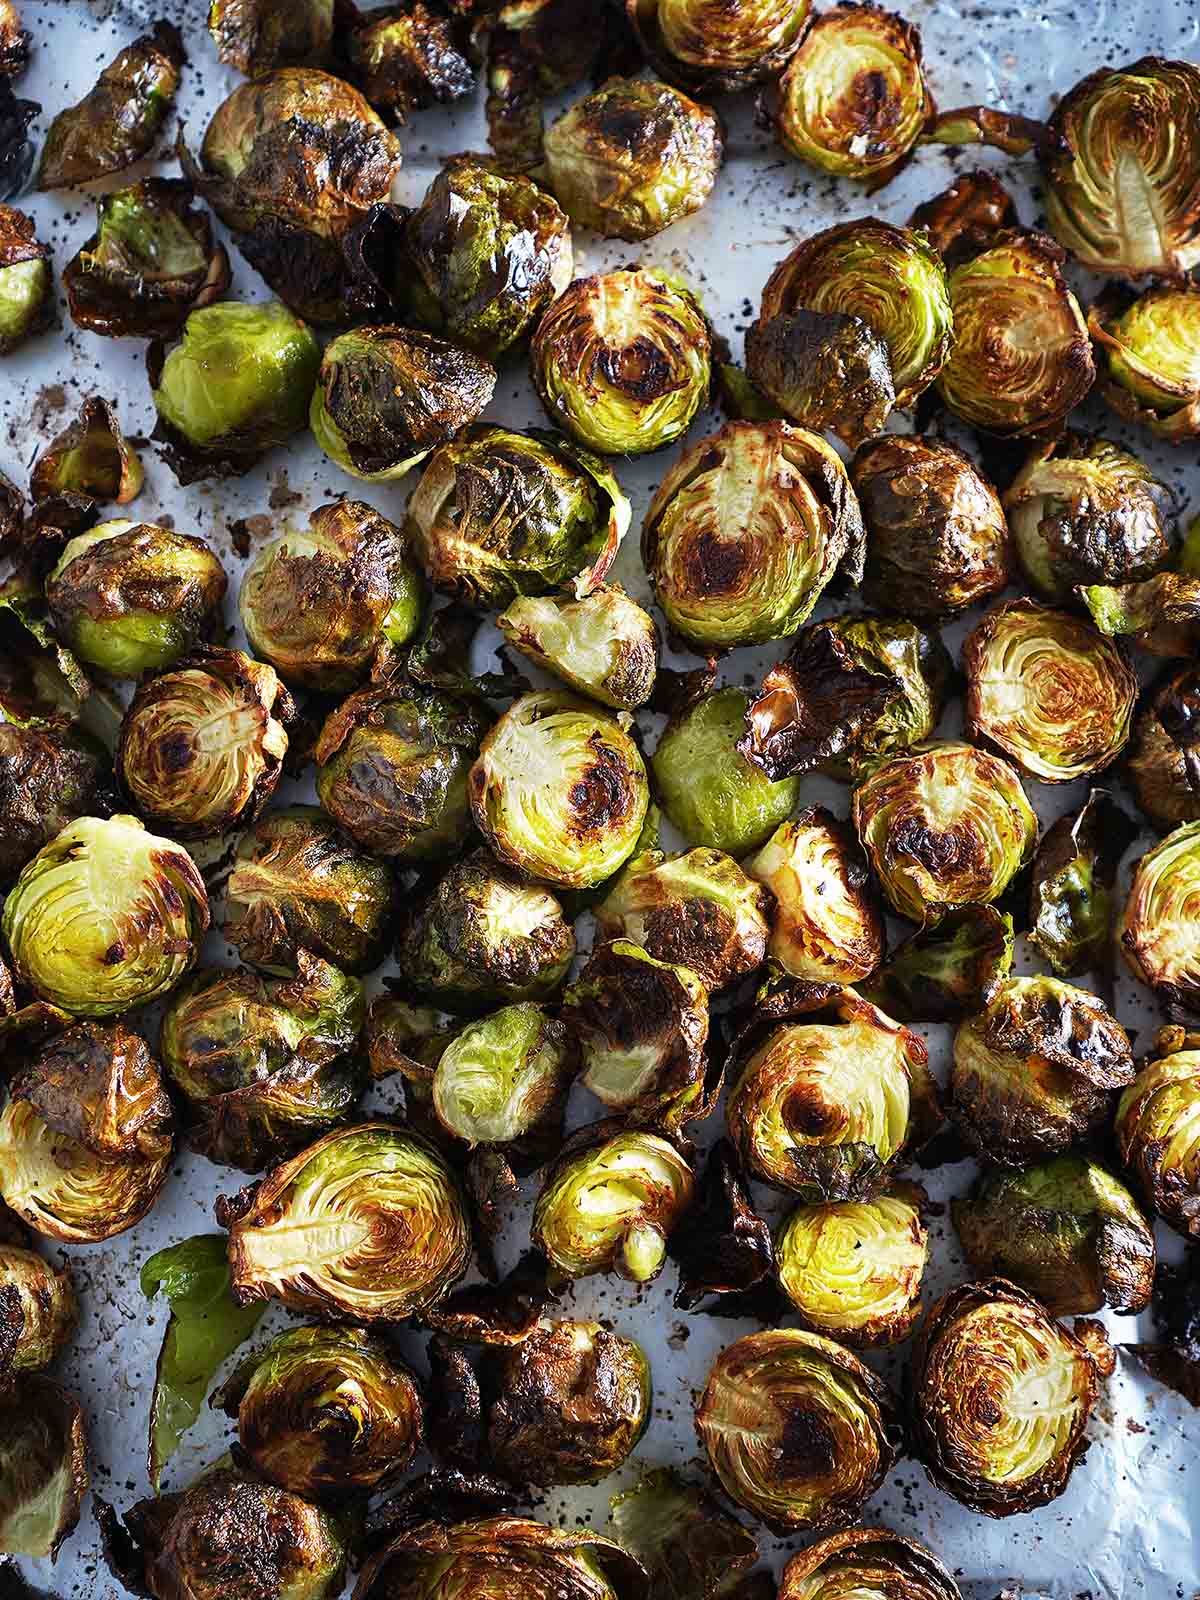 A baking tray with roasted sprouts.